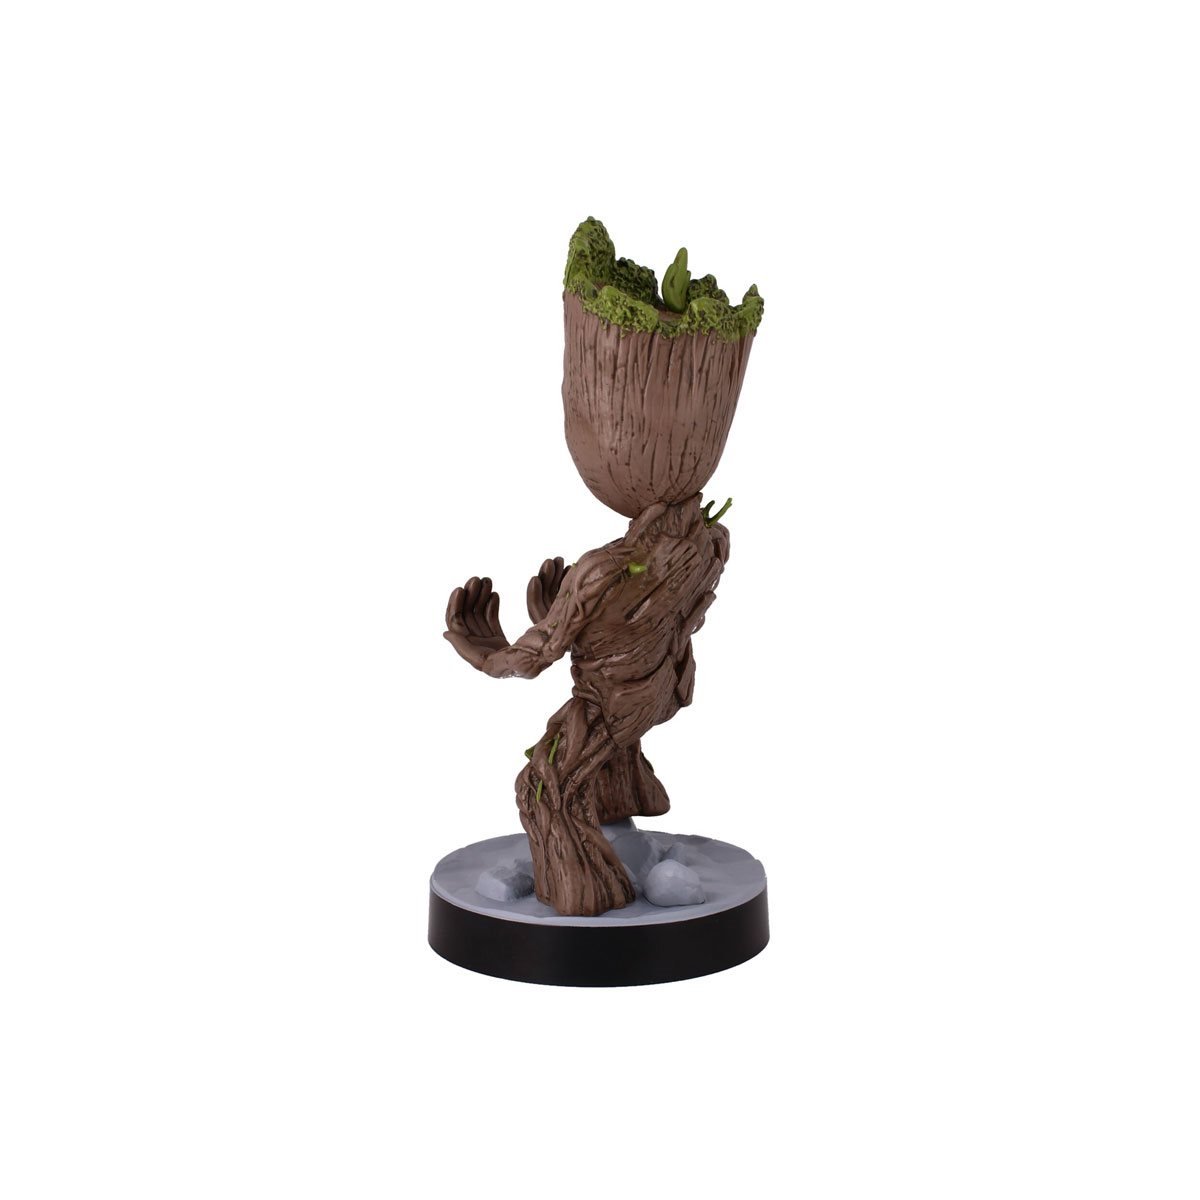 Cable Guys Toddler Groot Device Holder